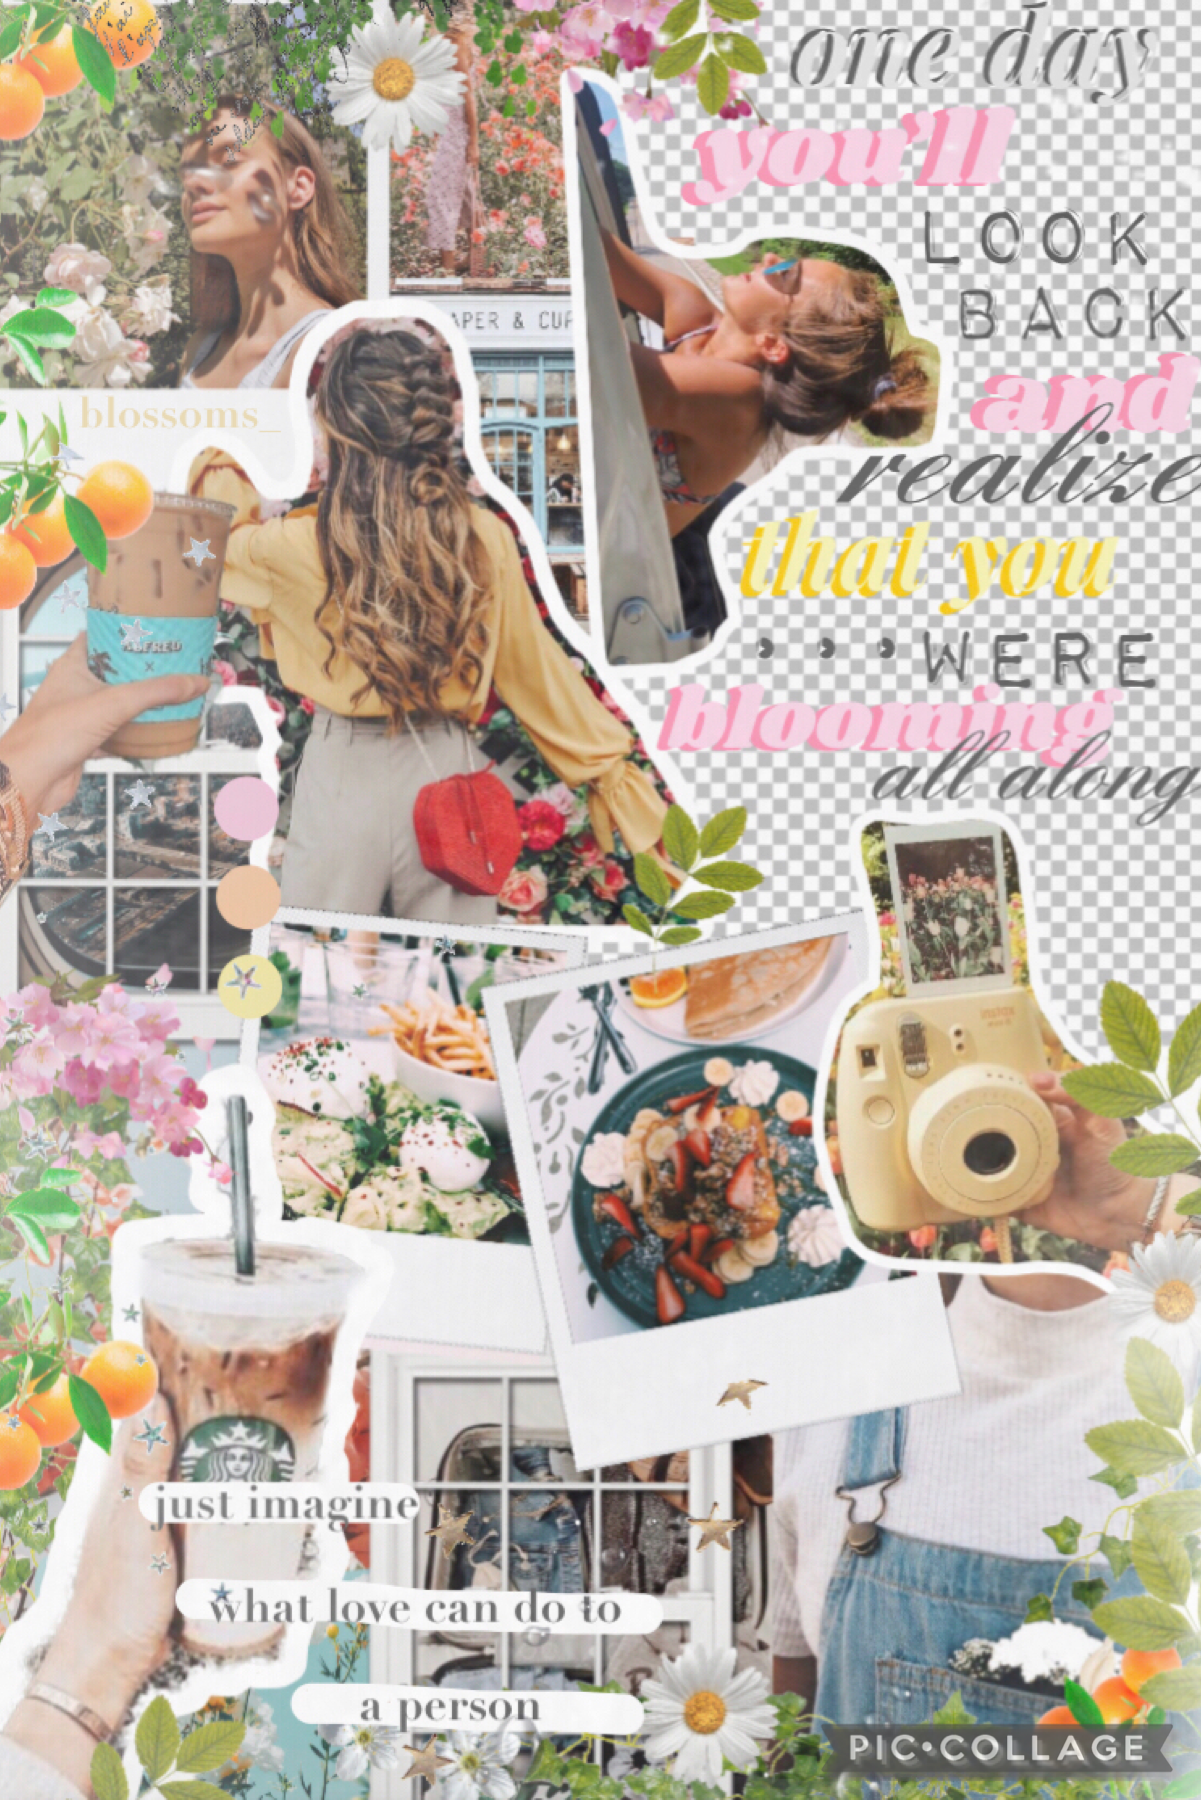 🌿 t a p 🌿
oh my gosh I am in love with this collage 🤩 I deleted my last collage so I can have a fresh start with my account. This is the type of theme I am now going for. 🌸🐚🌱🐥 It’s very spring vibes. Also sorry for not posting in so long 😞 2/19/22